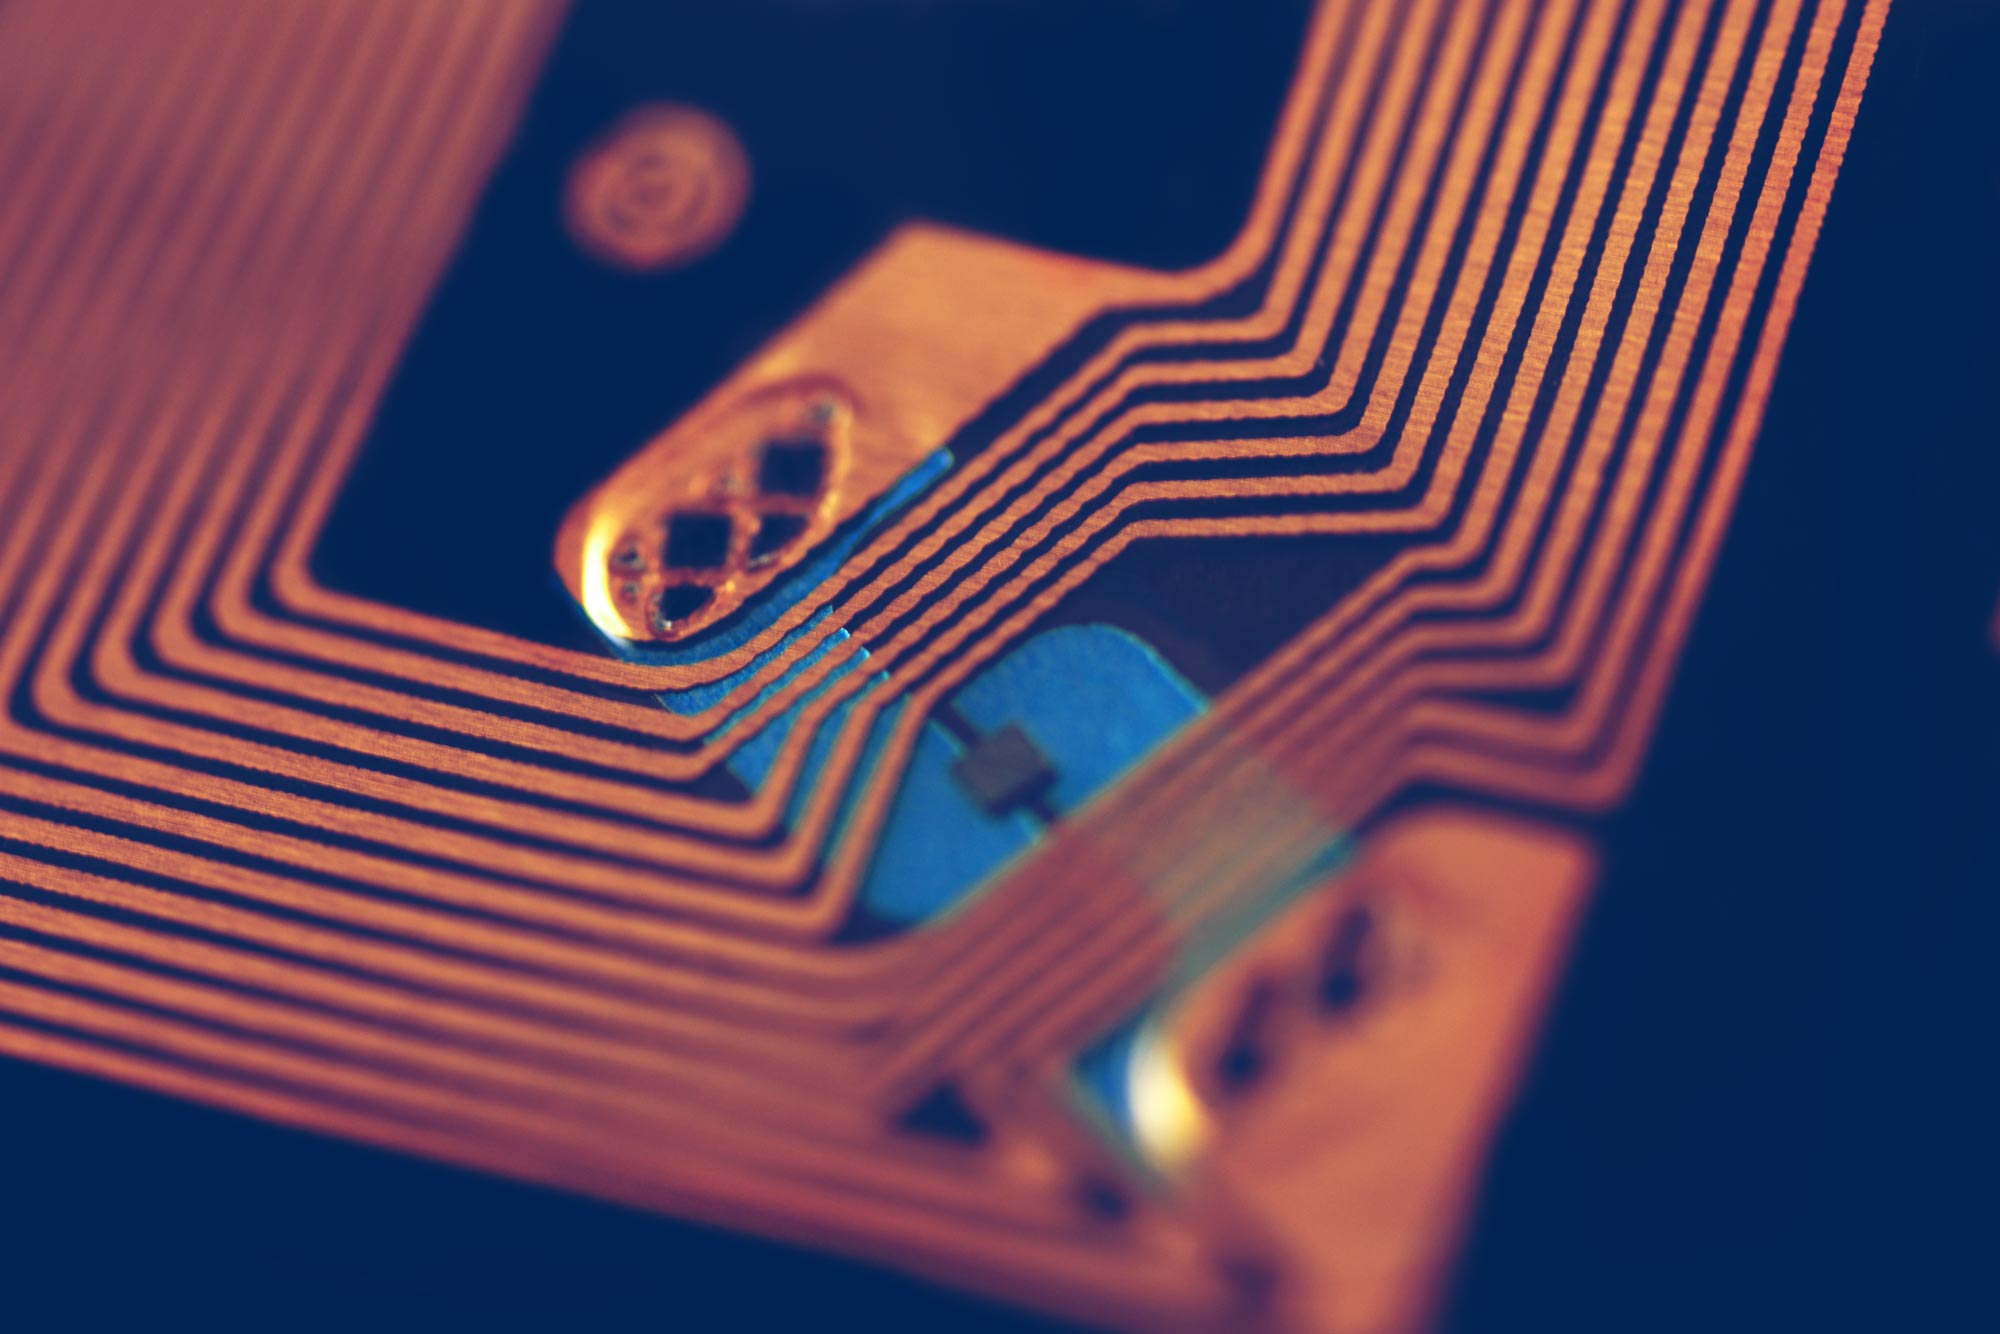 up close view of a microchip